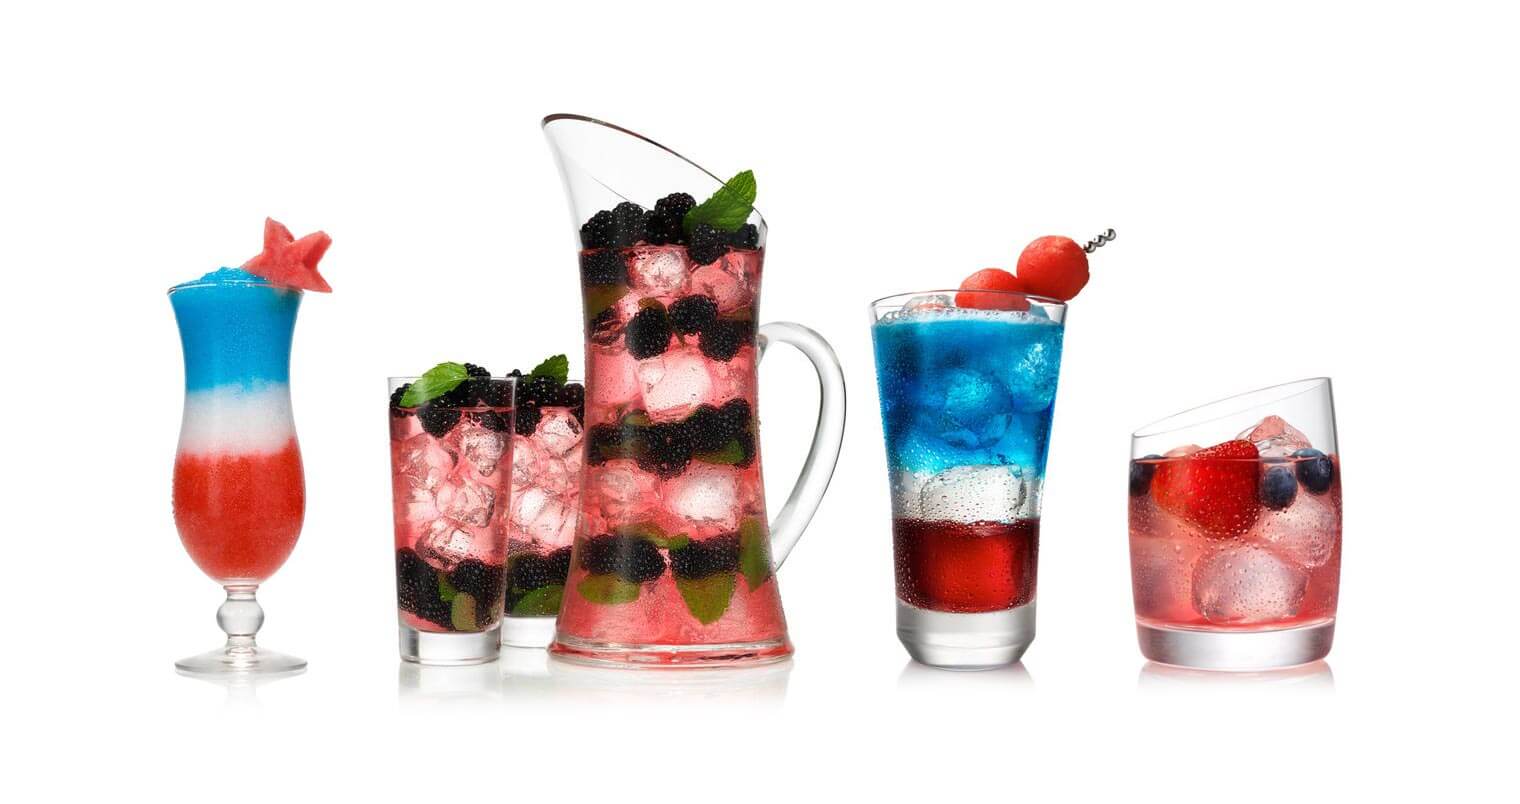 Limited Edition Stars & Stripes Svedka Summer Cocktails, featured image